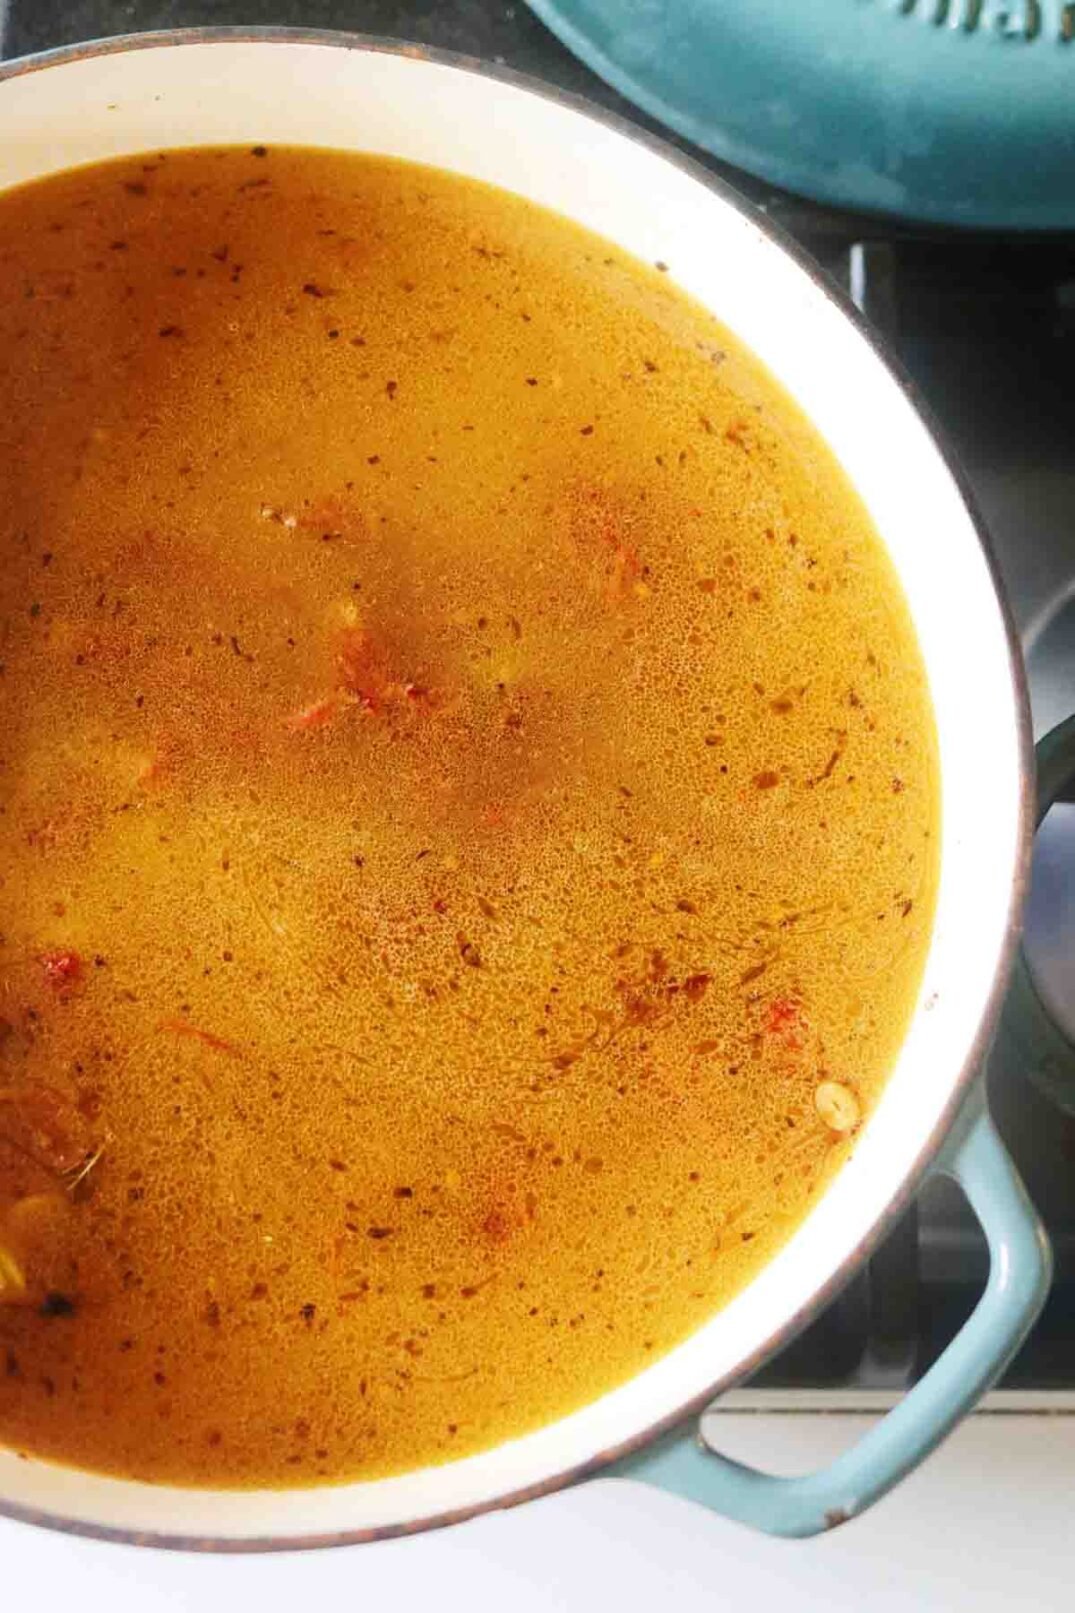 golden broth in a blue pan on the stovetop.